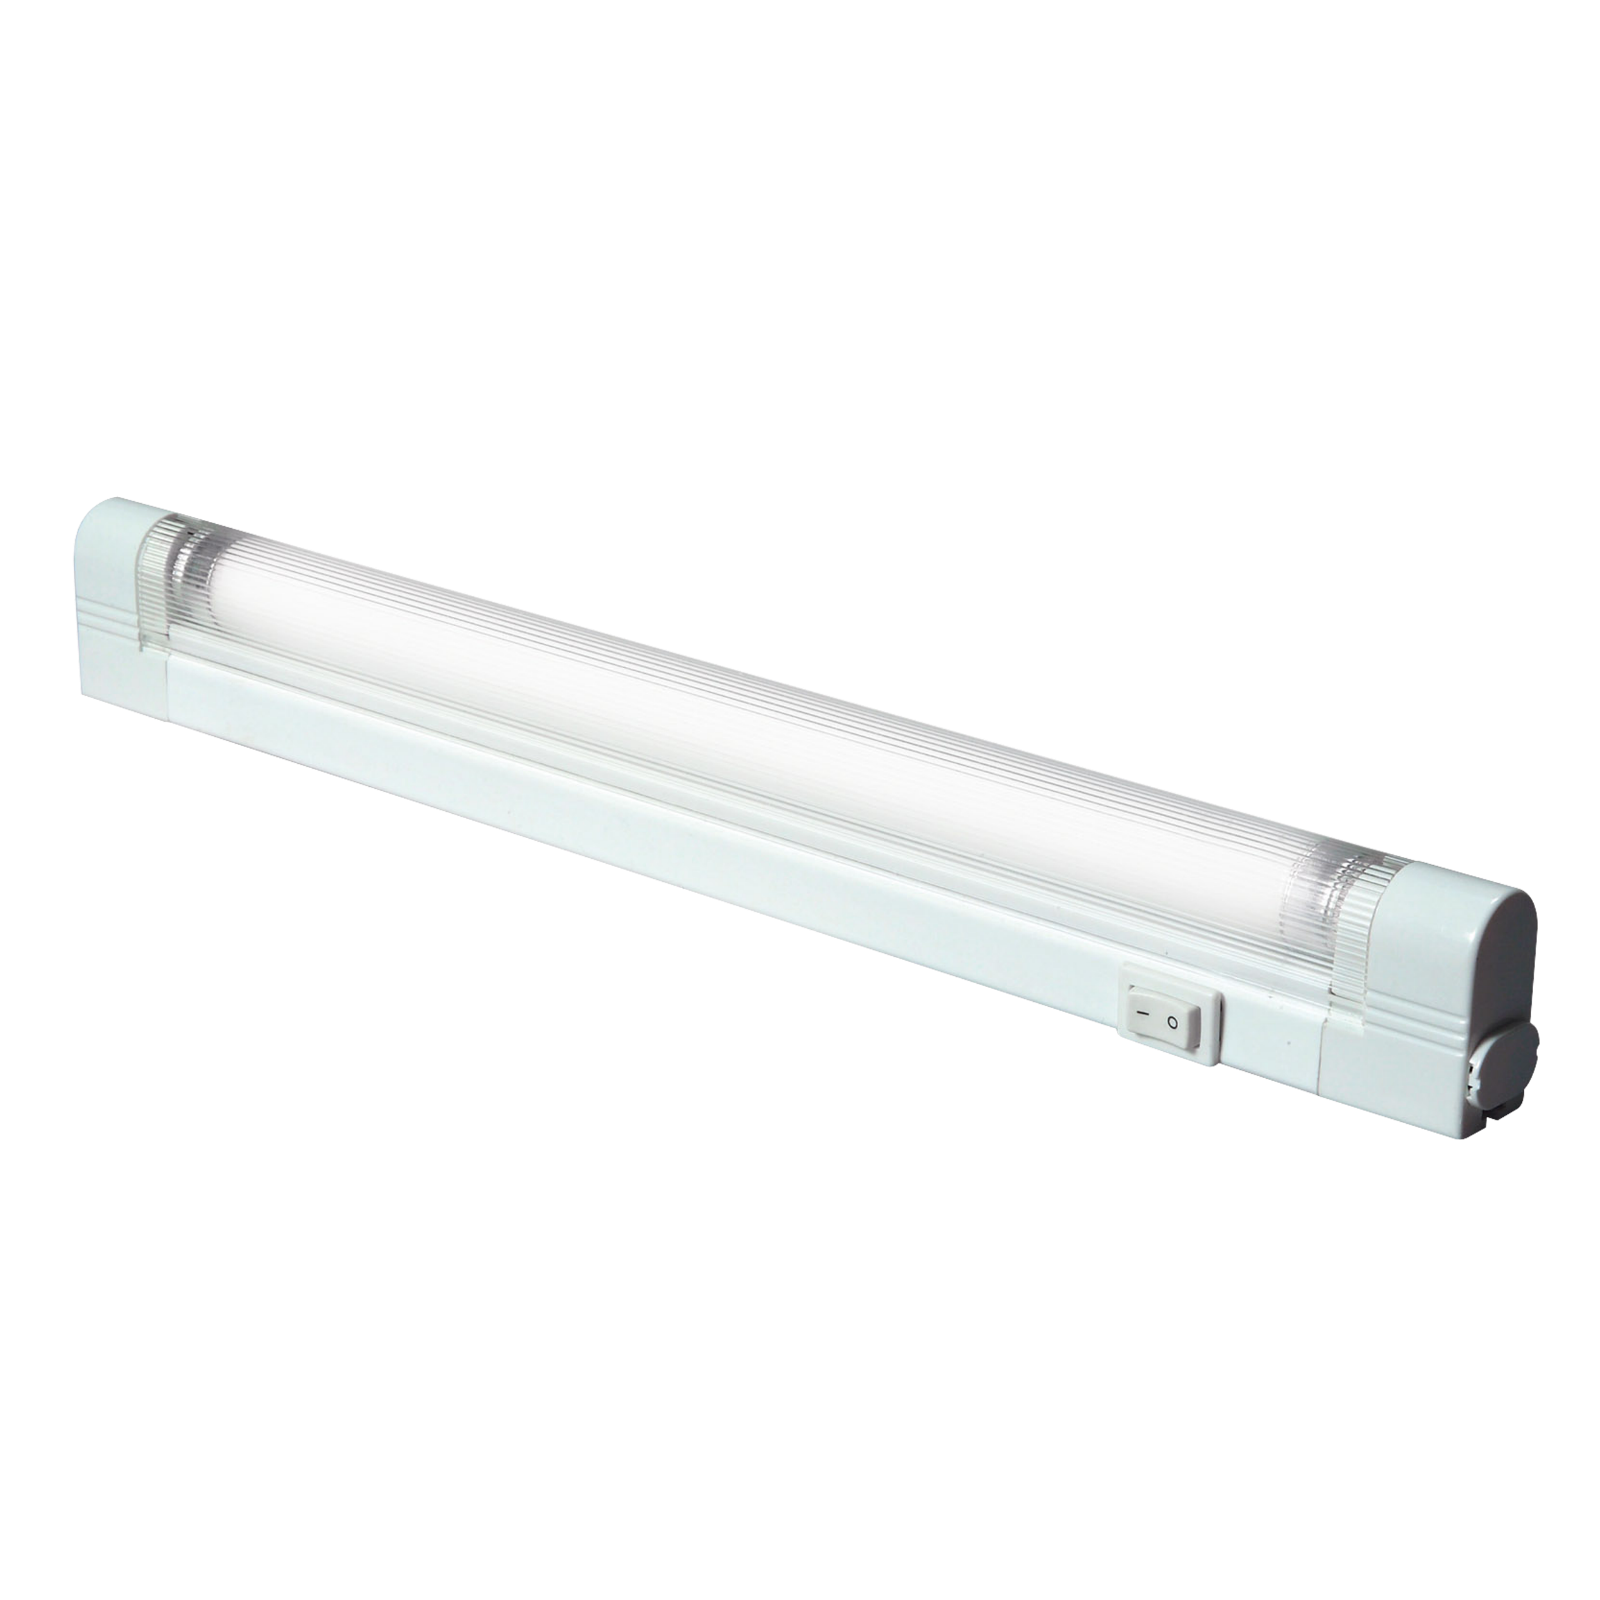 IP20 T5/G5 20W Slimline Linkable Fluorescent Fitting With Tube, Switch And Diffuser 3500K - T521 